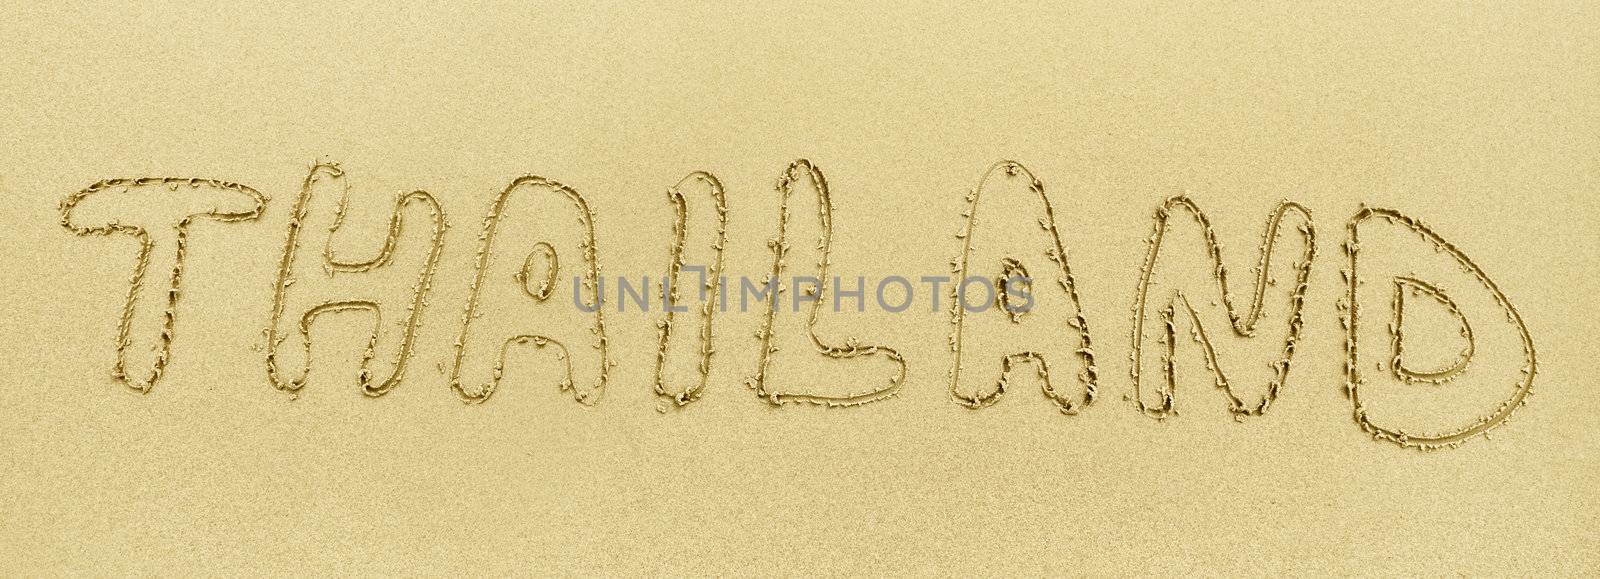 Inscription on the sand - Thailand by pzaxe